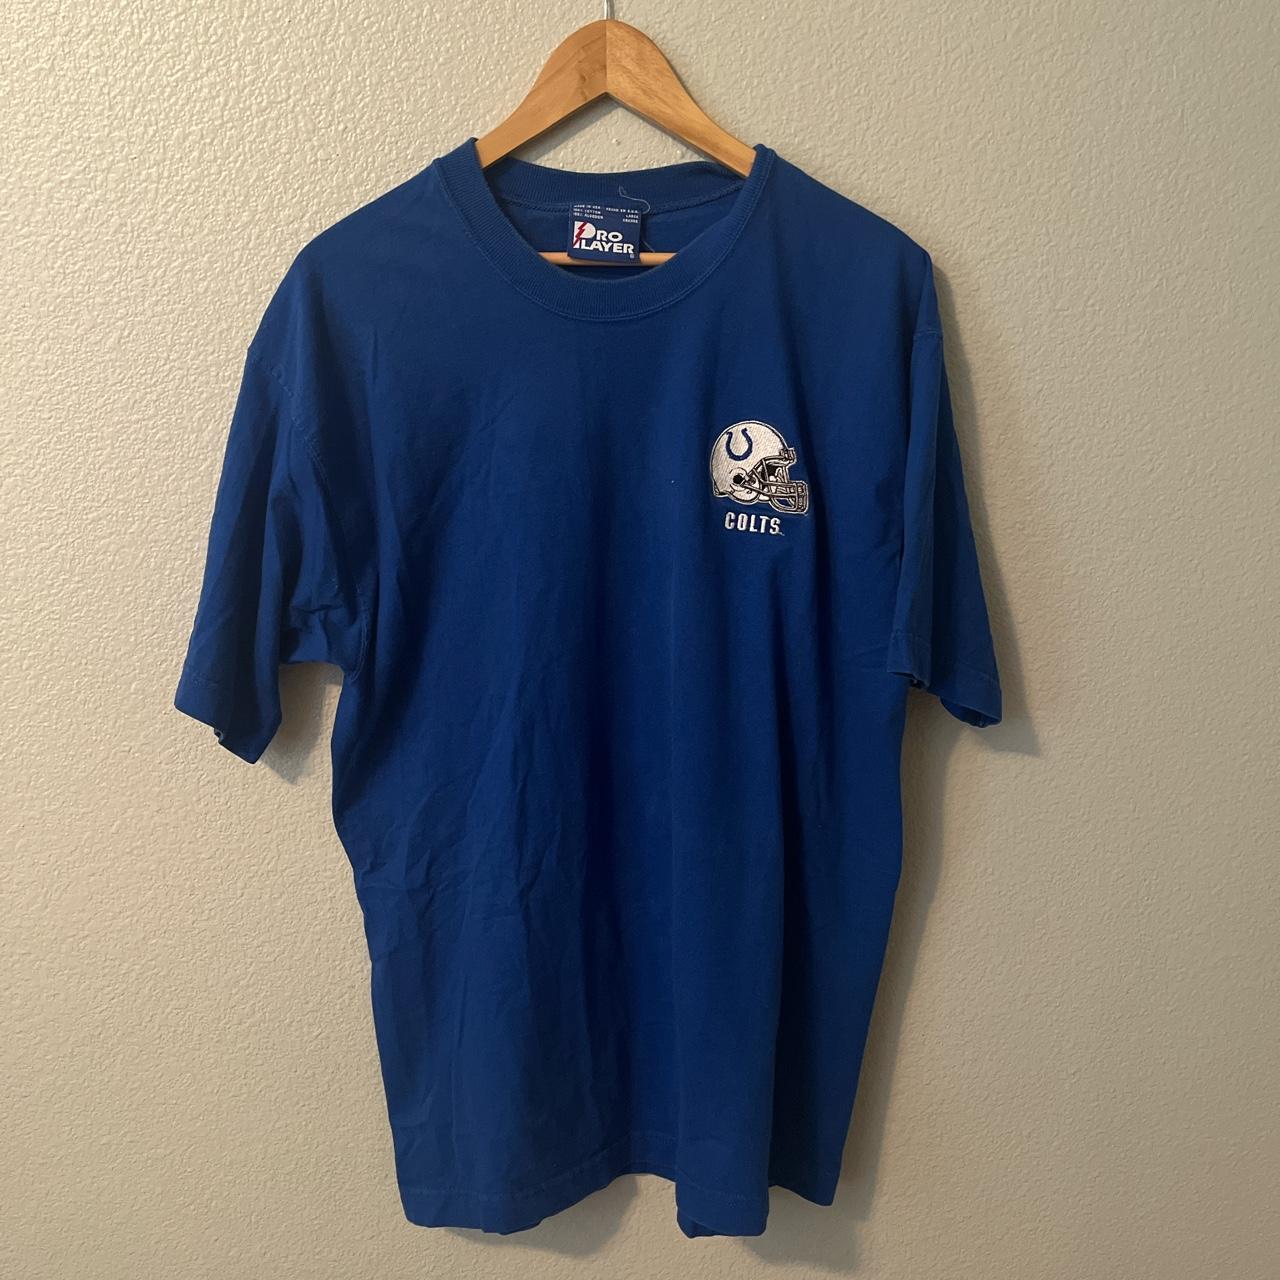 Vintage colts tee Pro player tag Size large #90s... - Depop